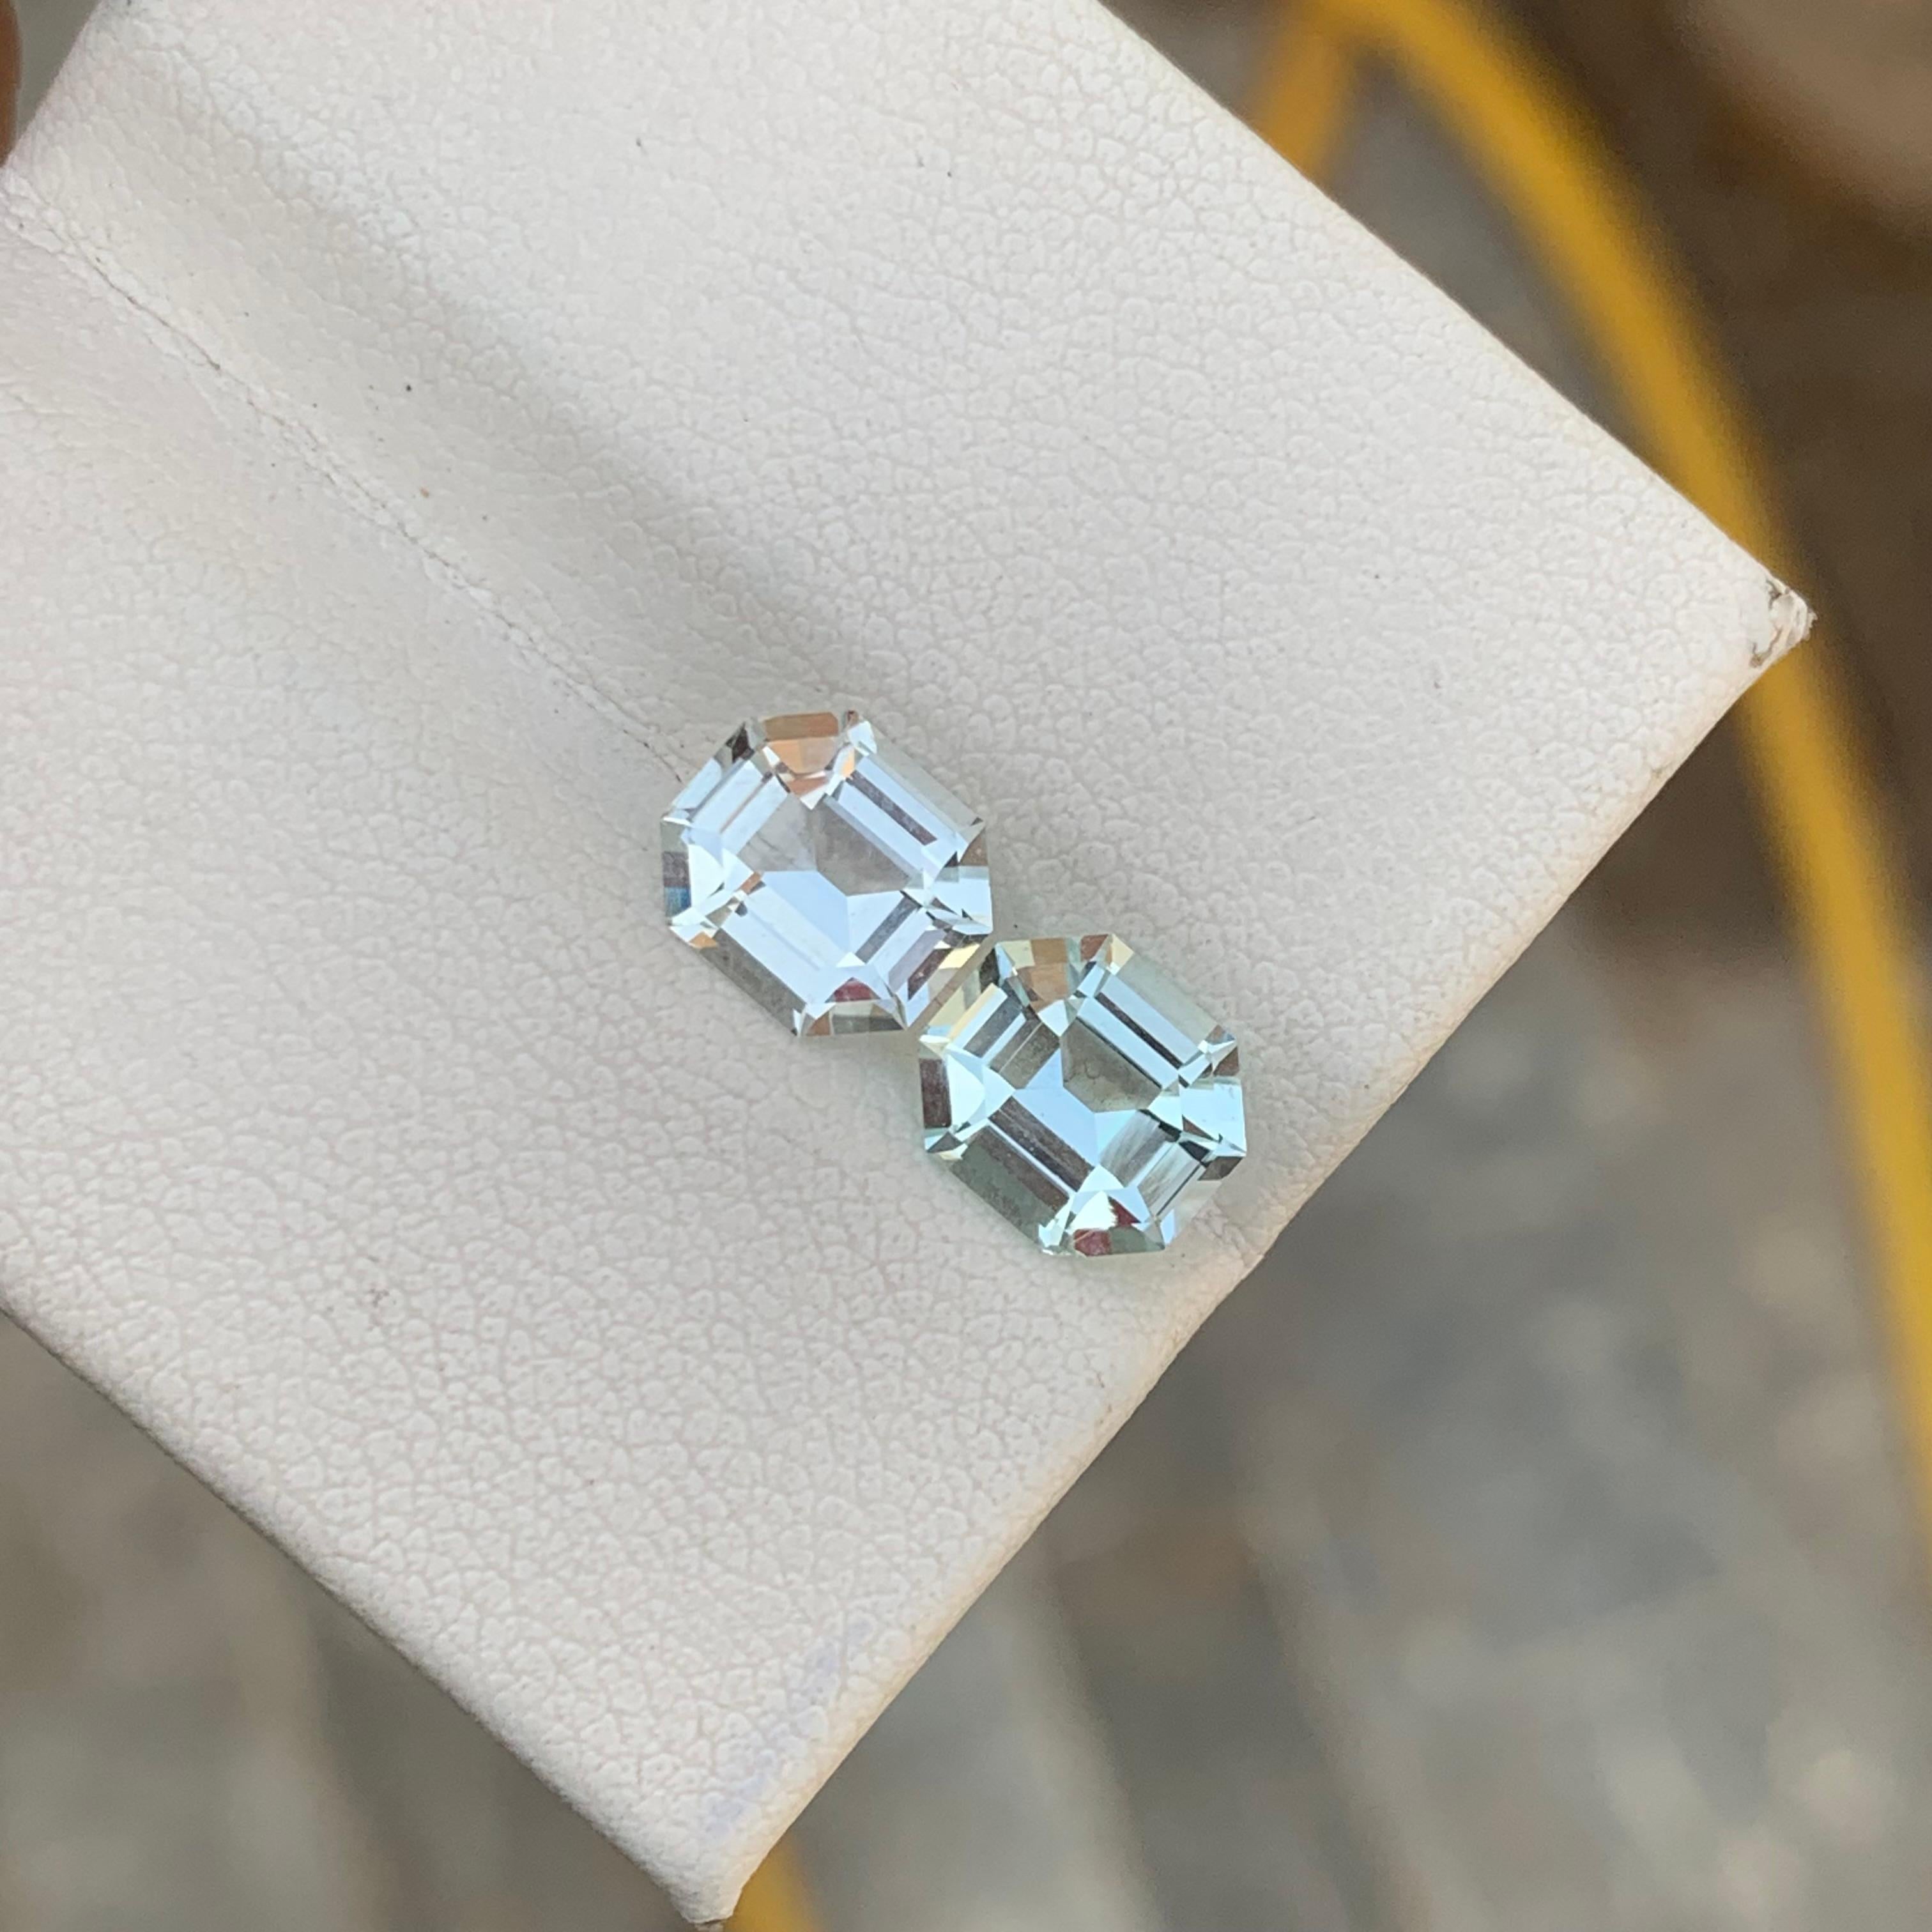 Gorgeous Natural Loose Aquamarine Pair For Earrings Jewelry 3.05 Carats  2